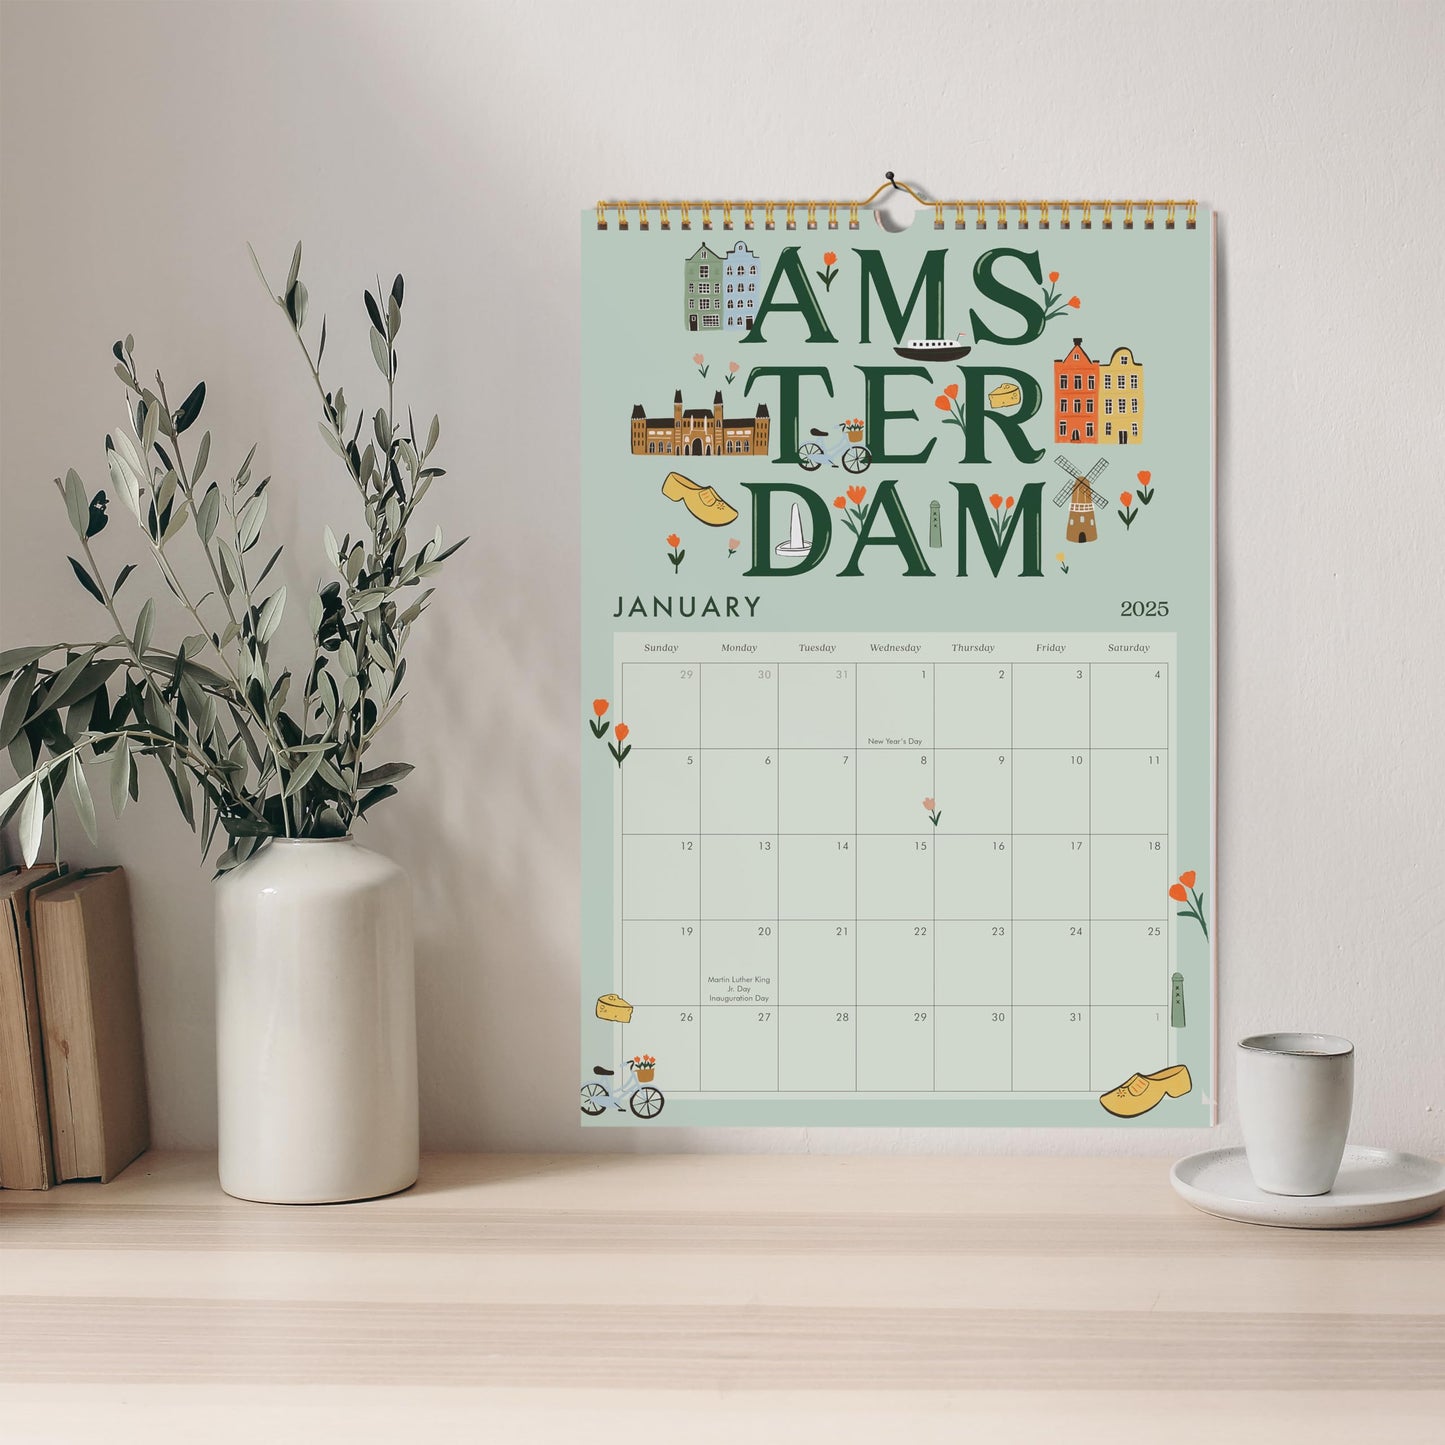 Aesthetic 2024-2025 Wall Calendar - Runs from June 2024 Until December 2025 - Twelve Beautiful Designs Inspired by Each City's Unique Charm - The Perfect Calendar Planner for Easy Organizing